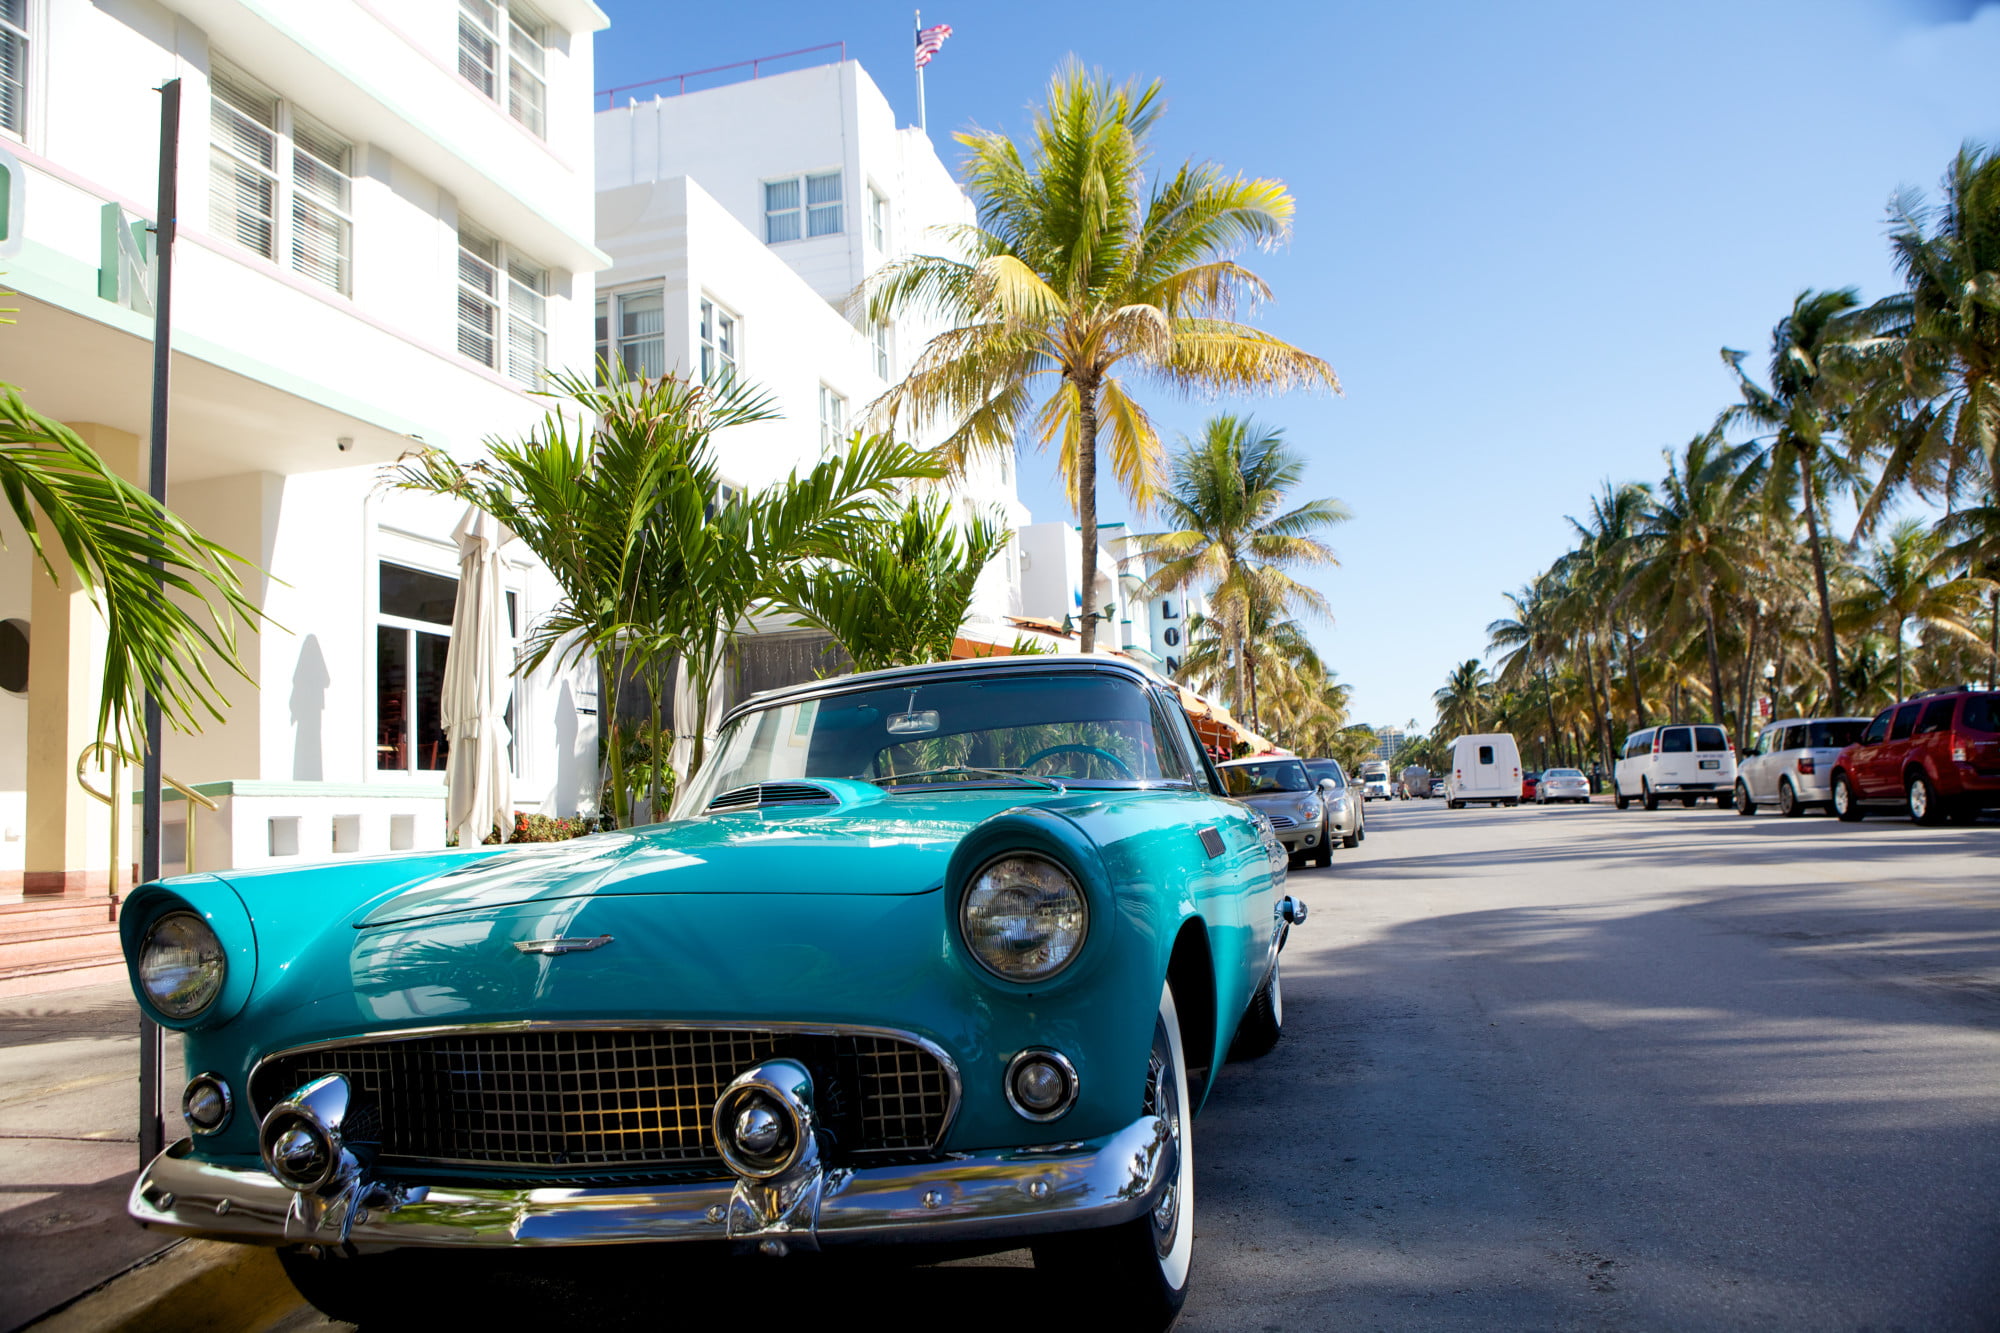 Are you wondering if Miami Beach is the right place for your family? Click here for the pros and cons of living in Miami Beach to help you decide.